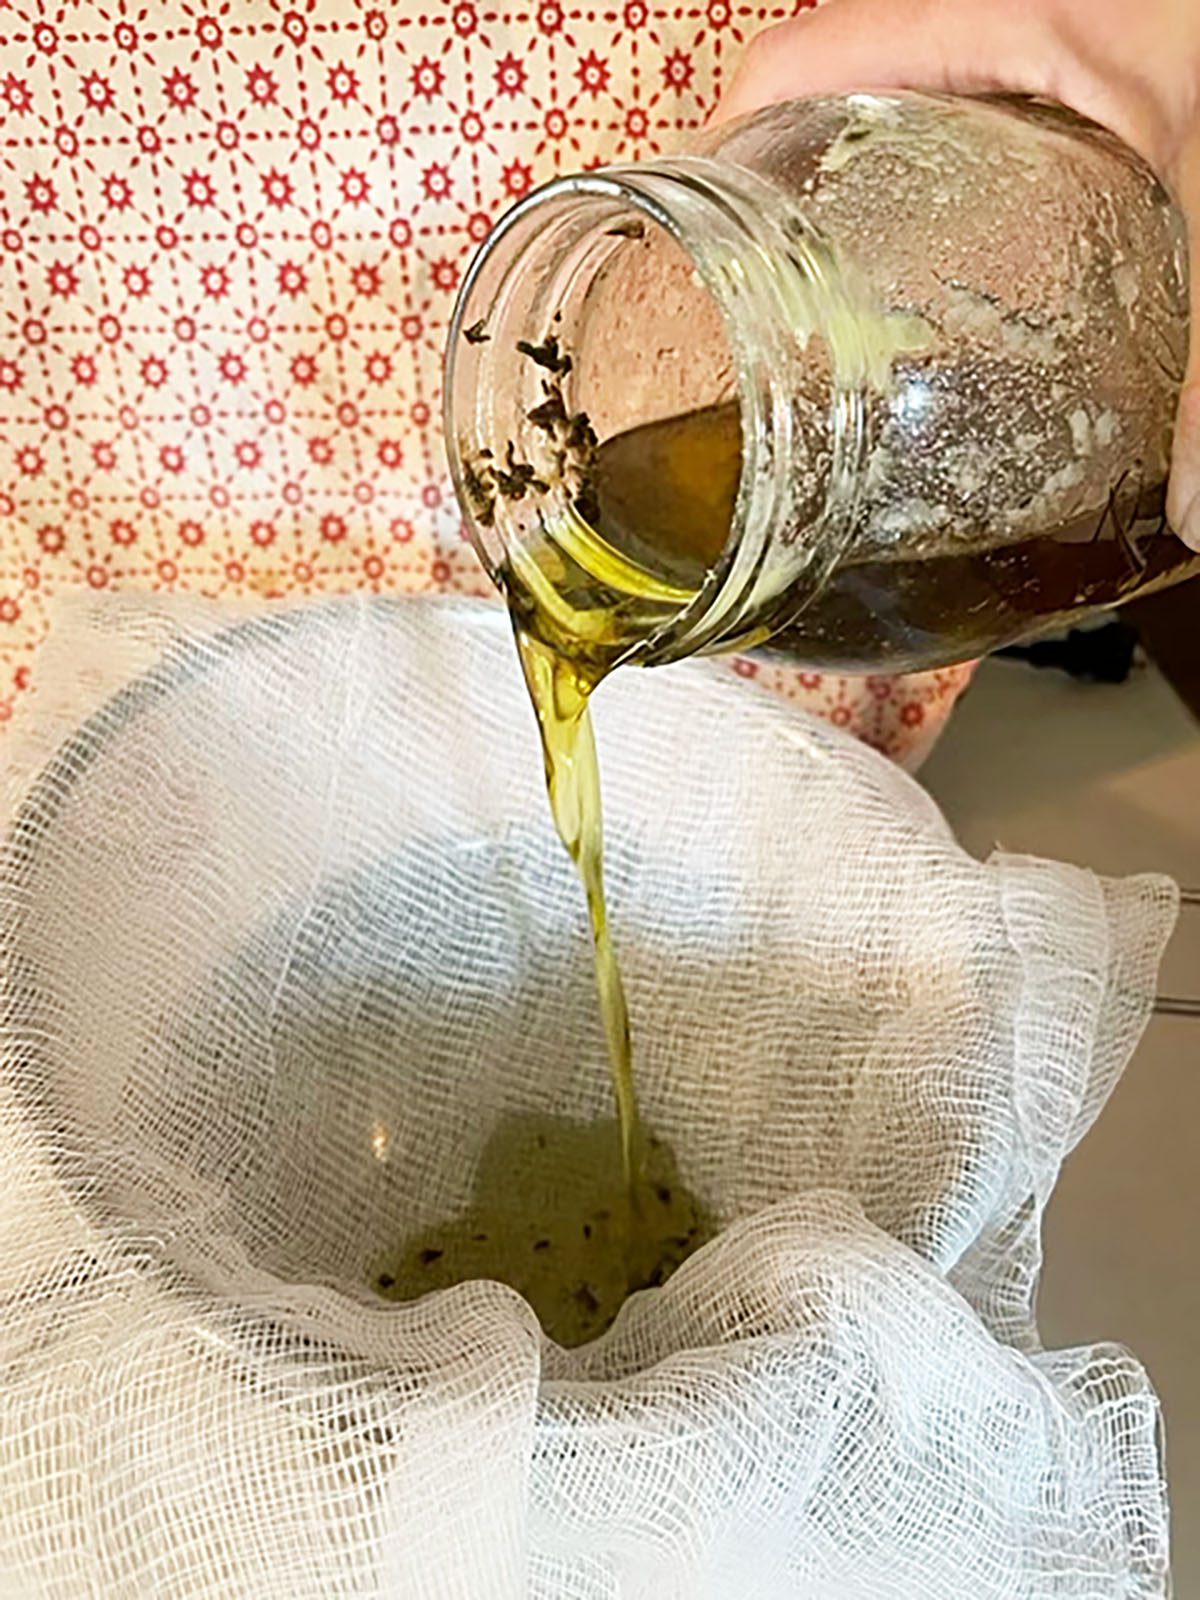 liquid cannabutter being poured through cheesecloth into a bowl to separate the oil from the plant matter.